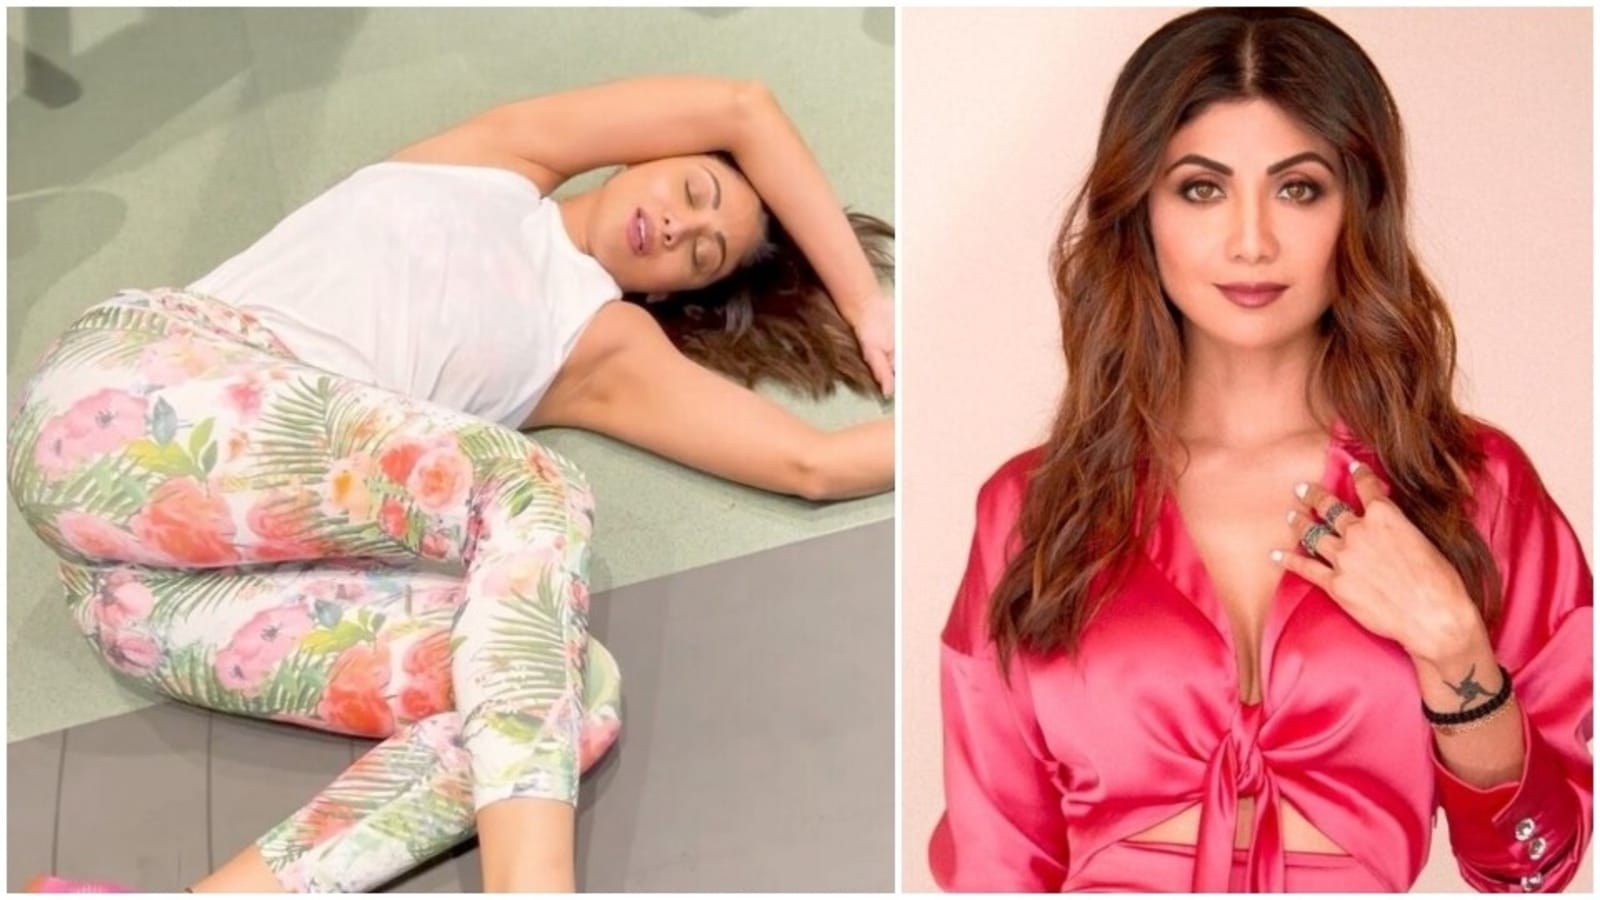 Silpa Shetty Xxx - Shilpa Shetty passes out after tough workout in funny post-gym video: Watch  | Health - Hindustan Times